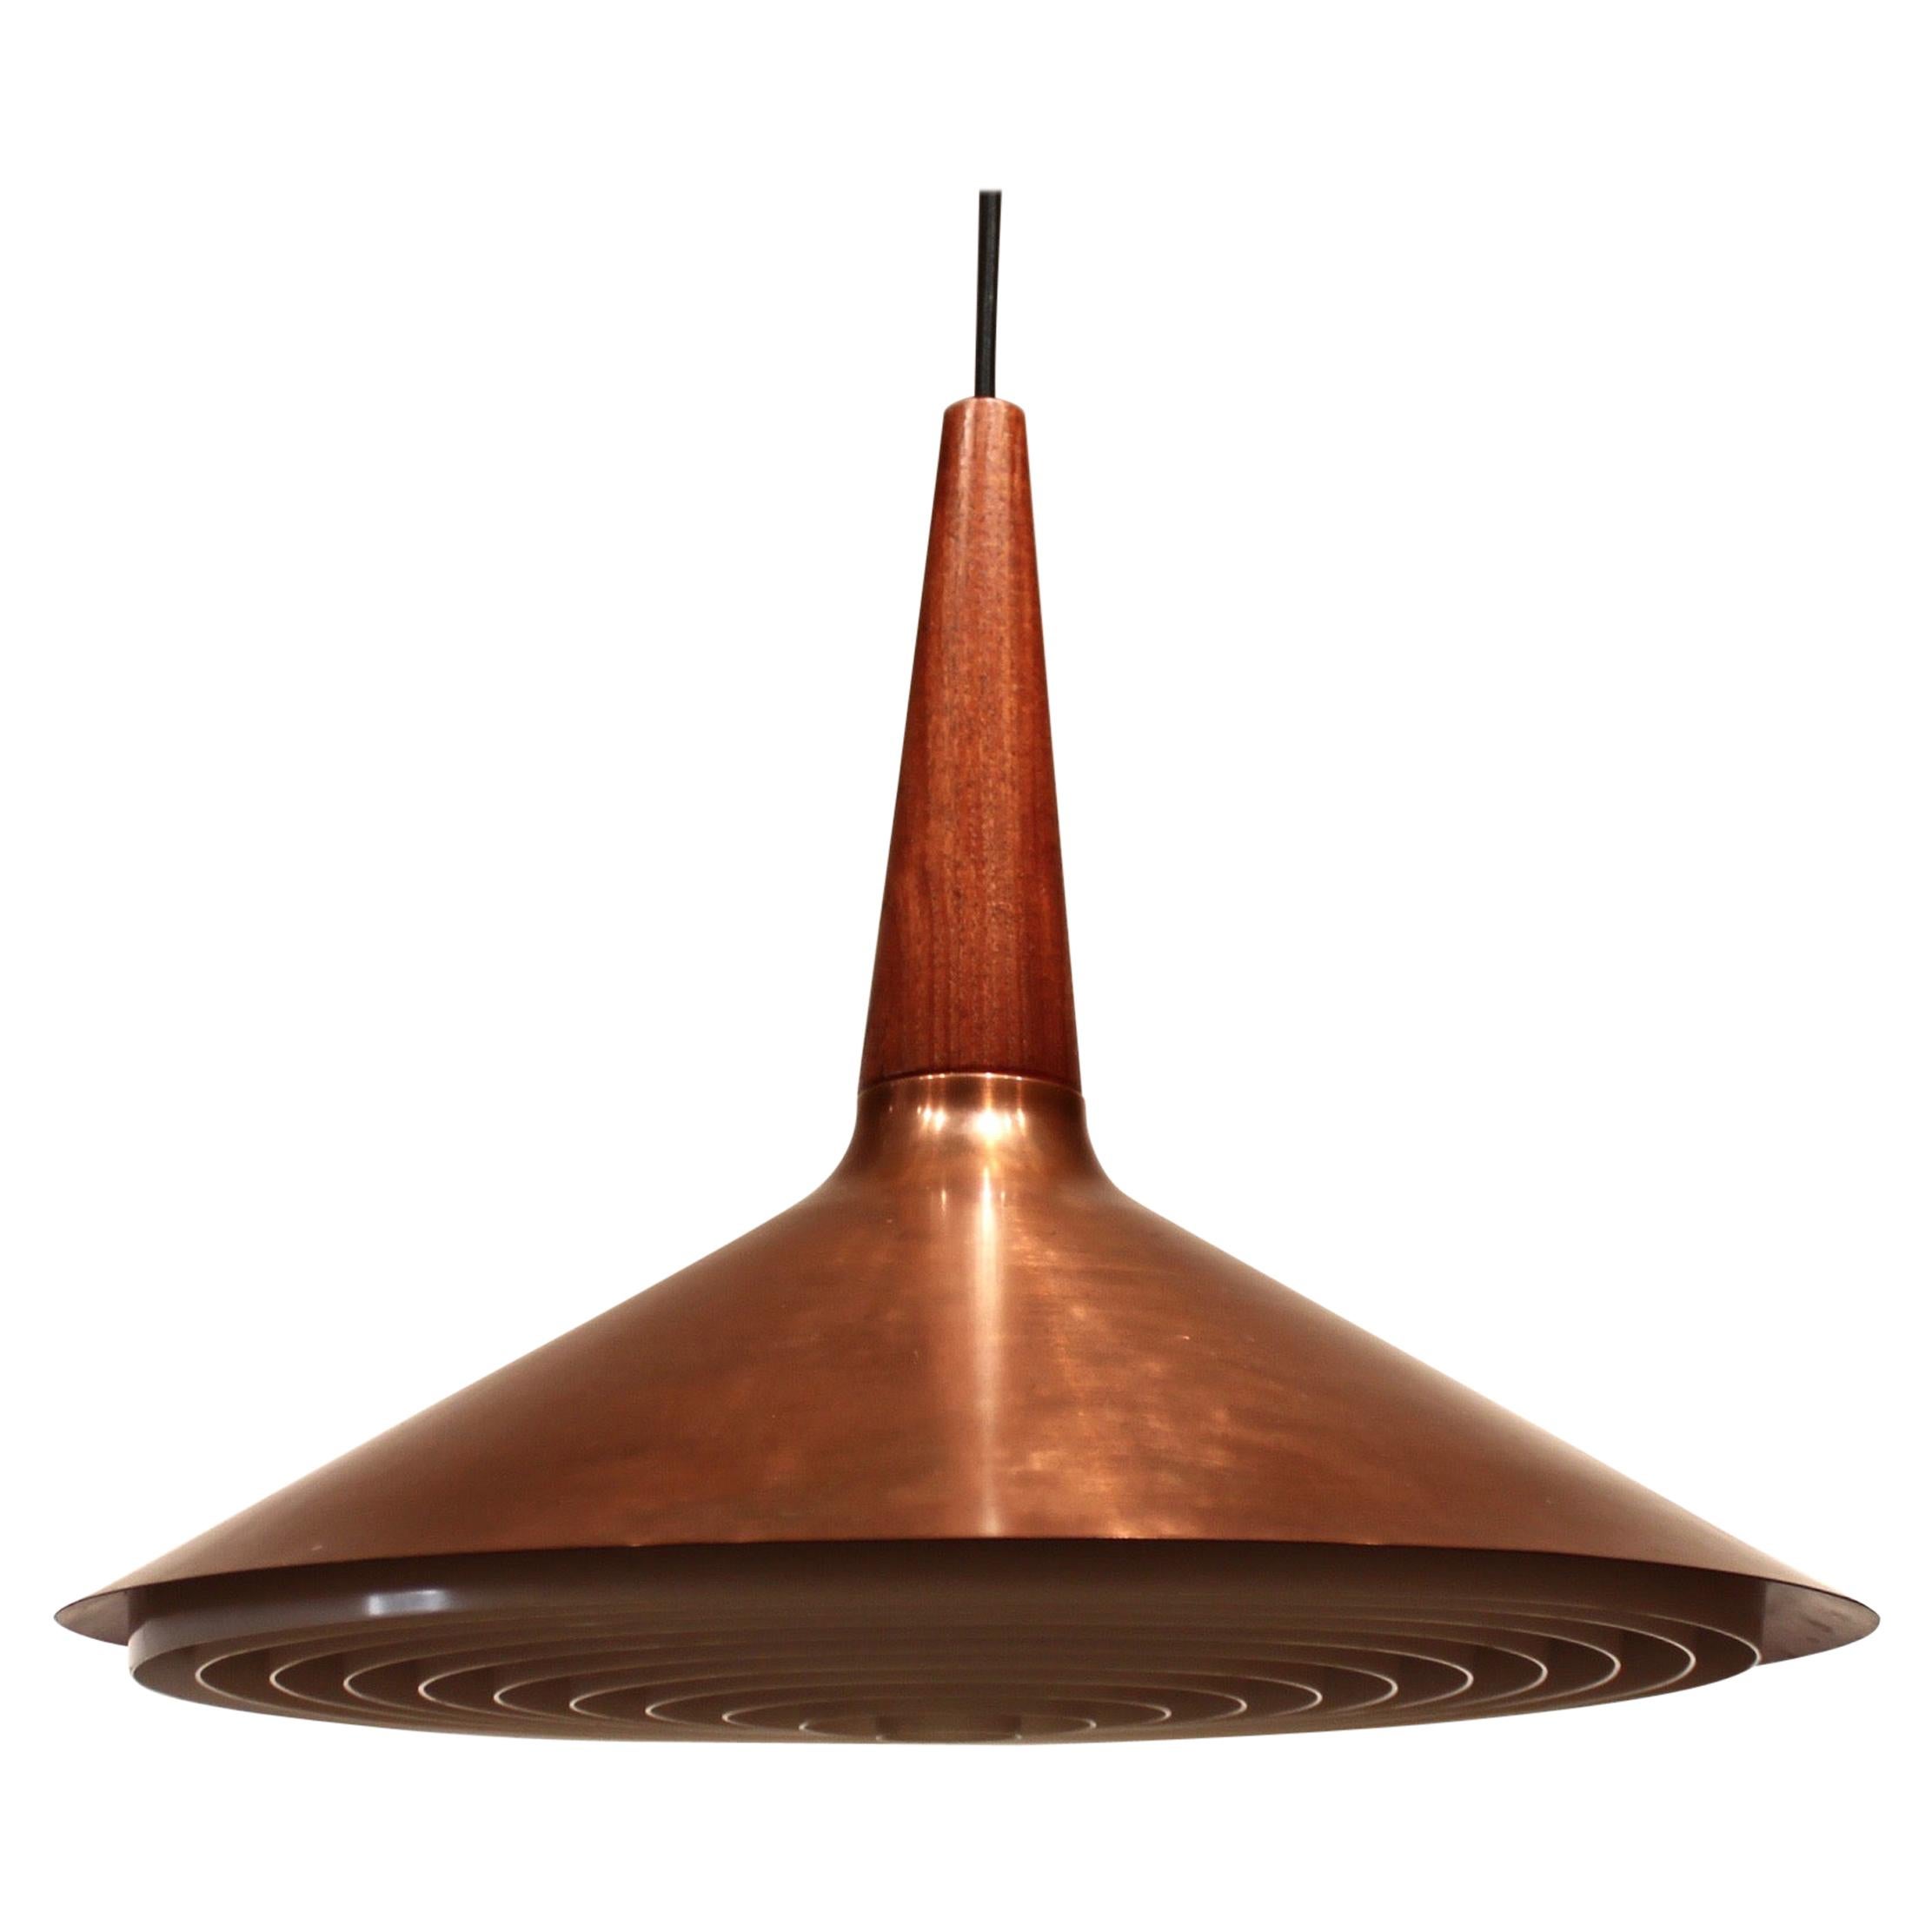 Ceiling Pendant in Copper and Teak of Danish Design from the 1960s